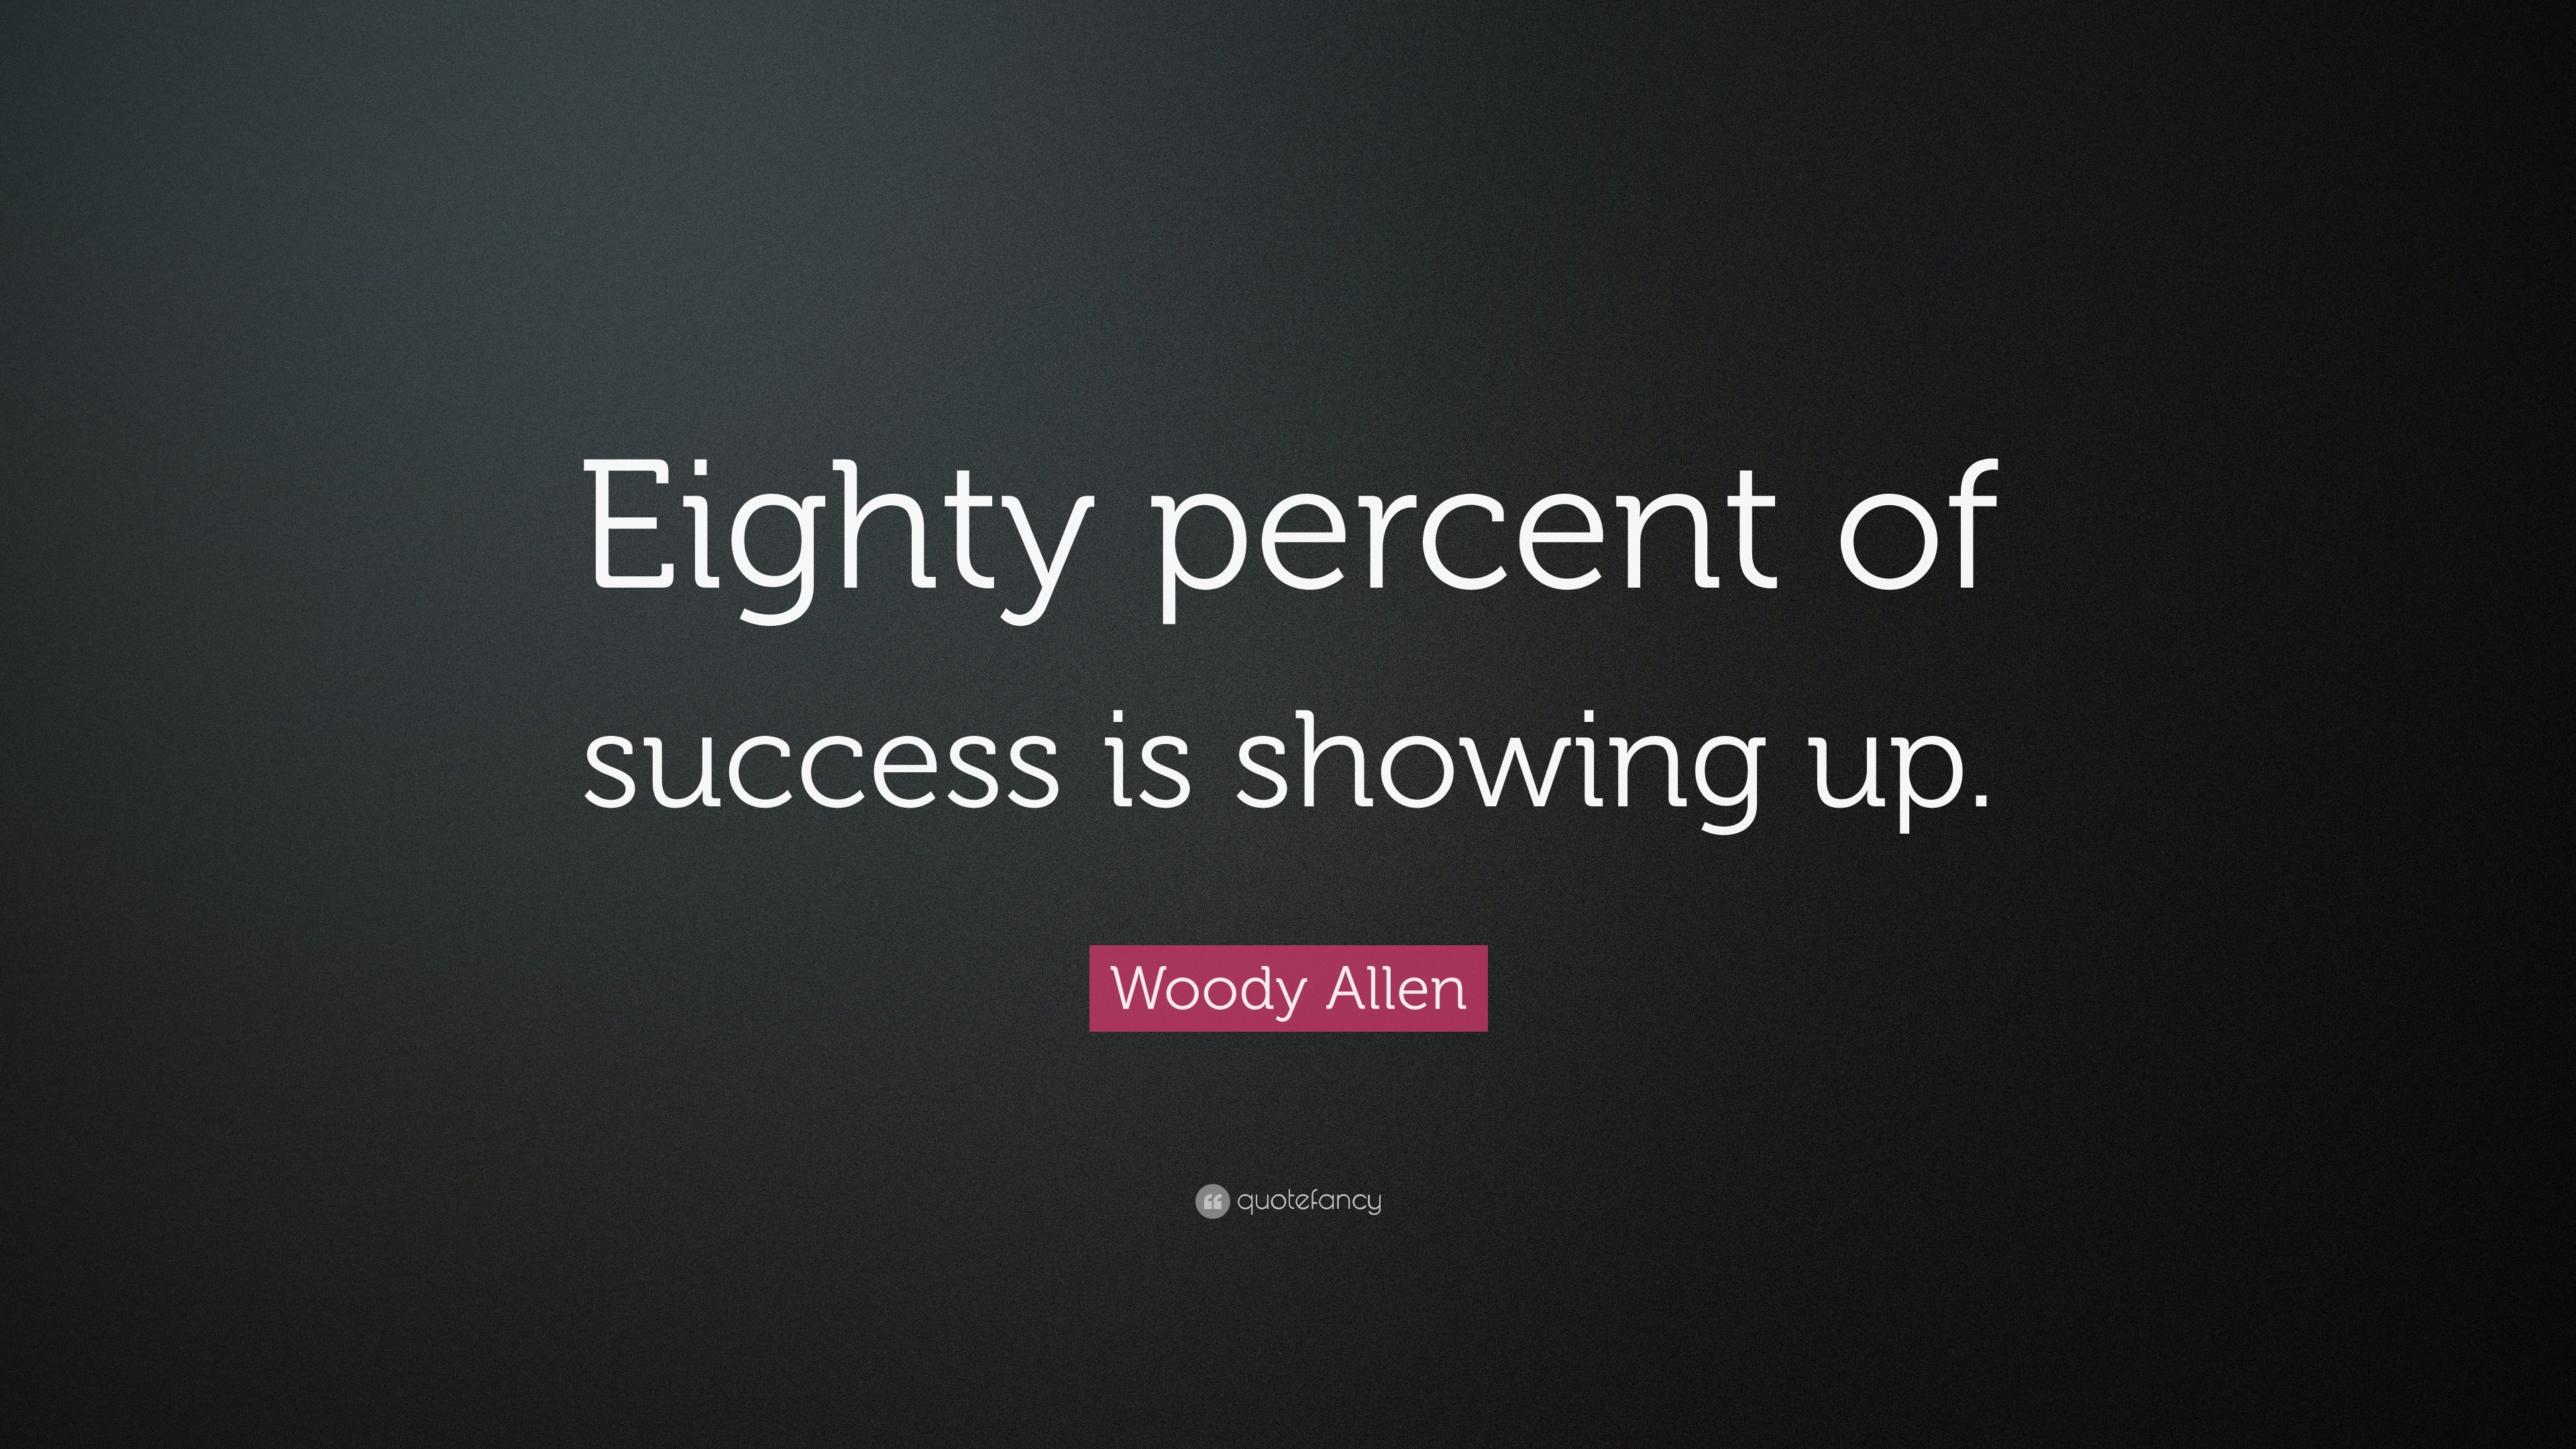 Woody Allen Quote “eighty Percent Of Success Is Showing Up” 6846